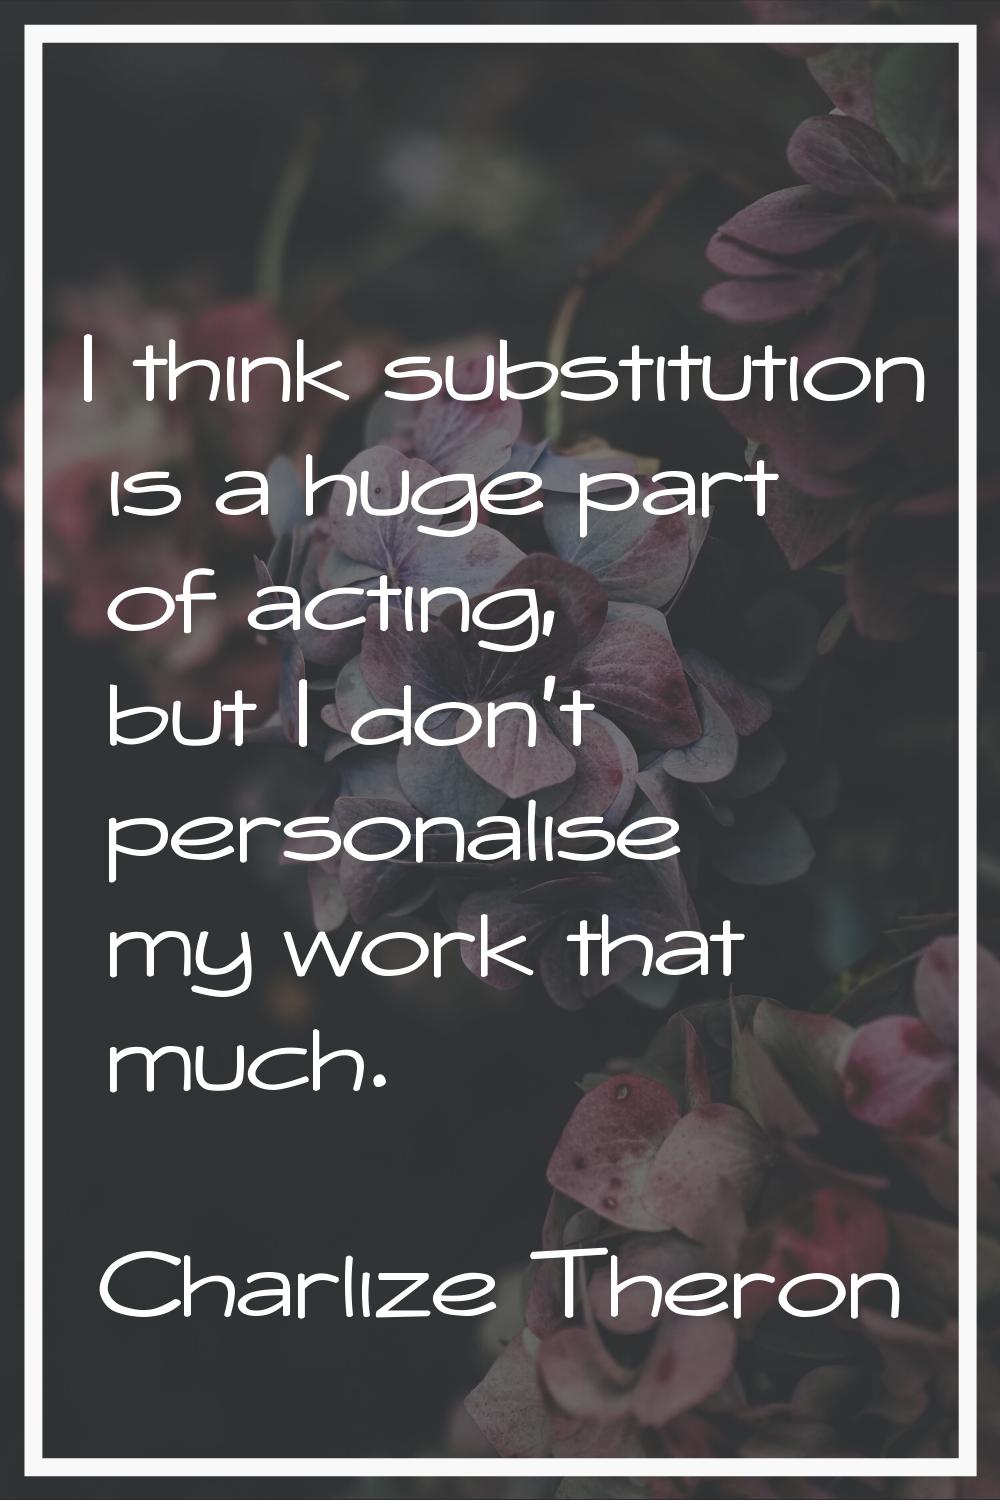 I think substitution is a huge part of acting, but I don't personalise my work that much.